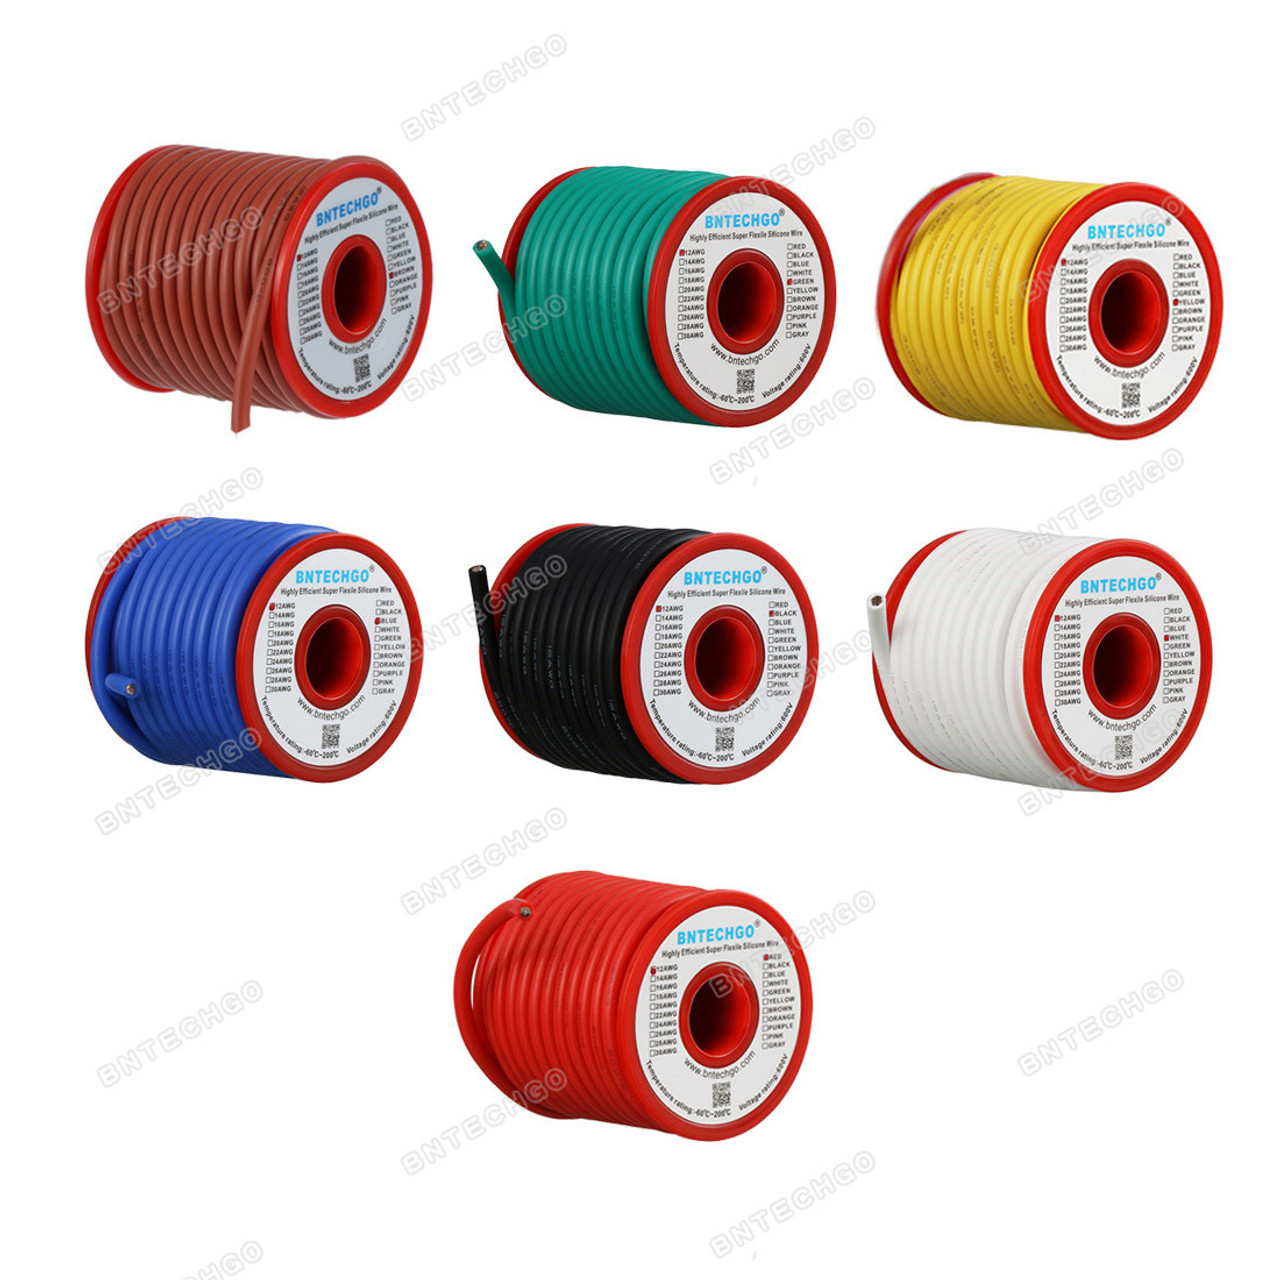 12 Gauge Silicone Insulated Wire PER METER - Luna Cycle